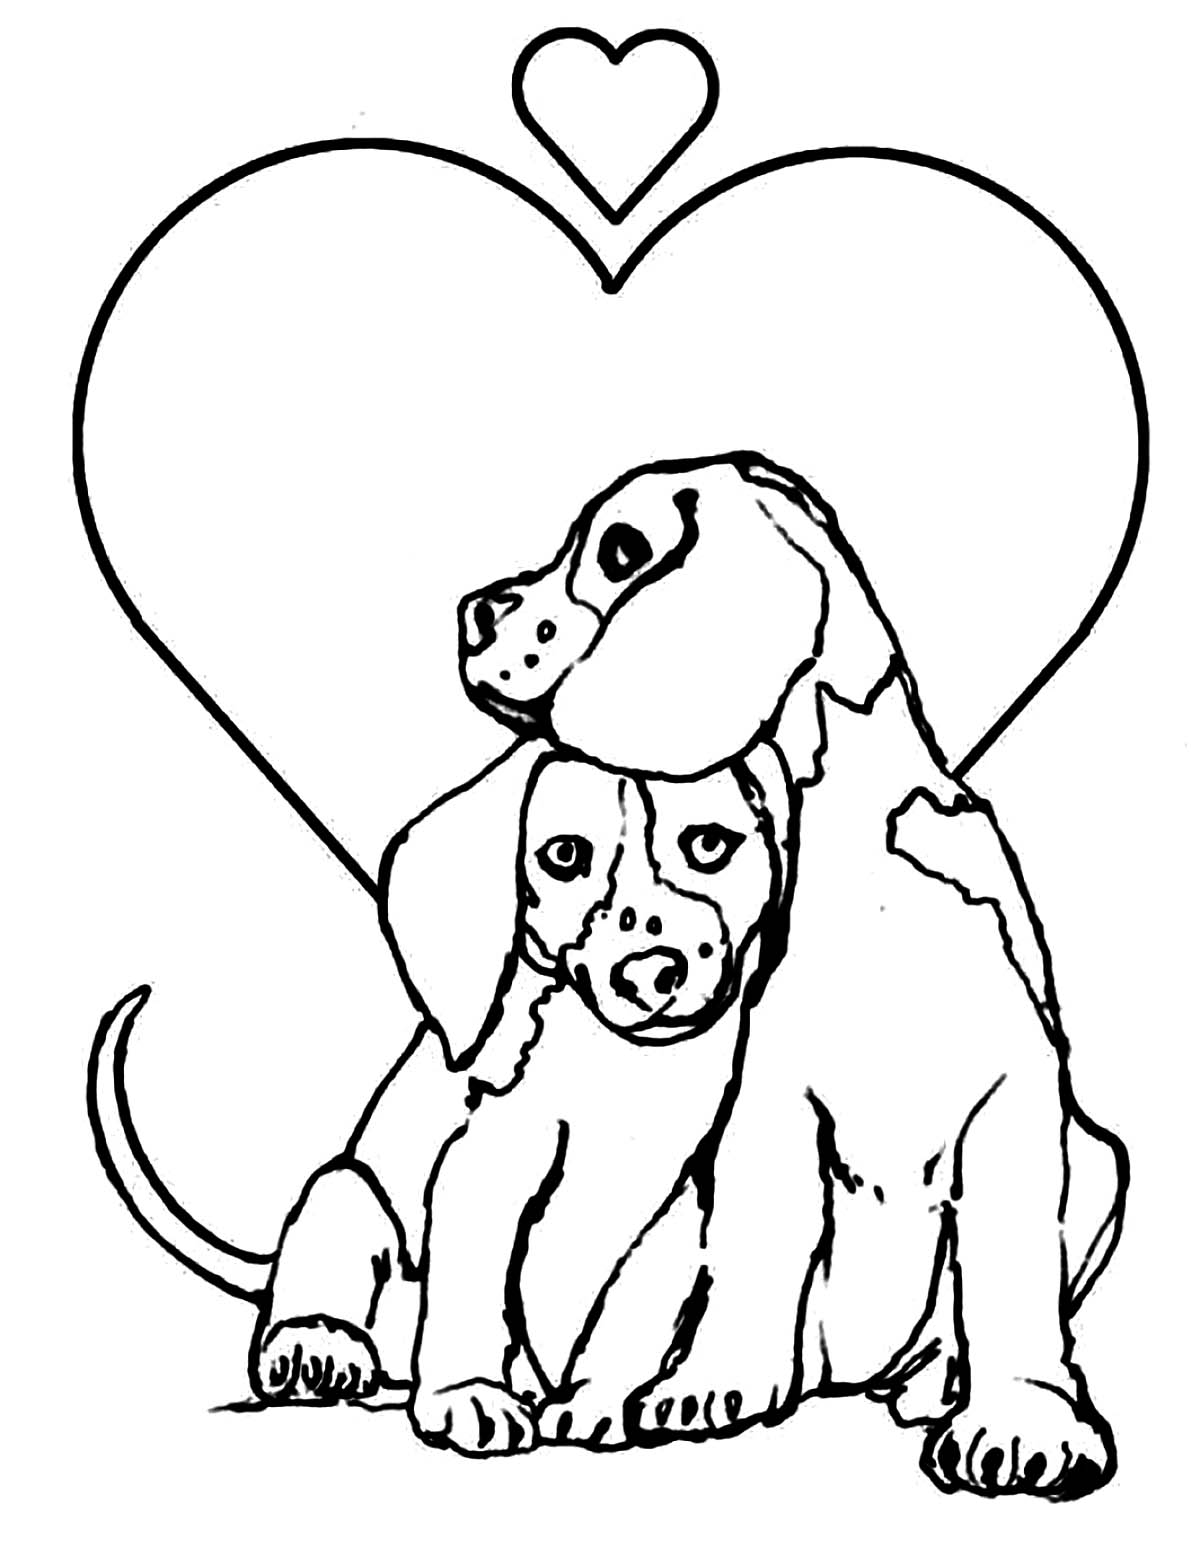 Dog for children  loving dogs   Dogs Kids Coloring Pages